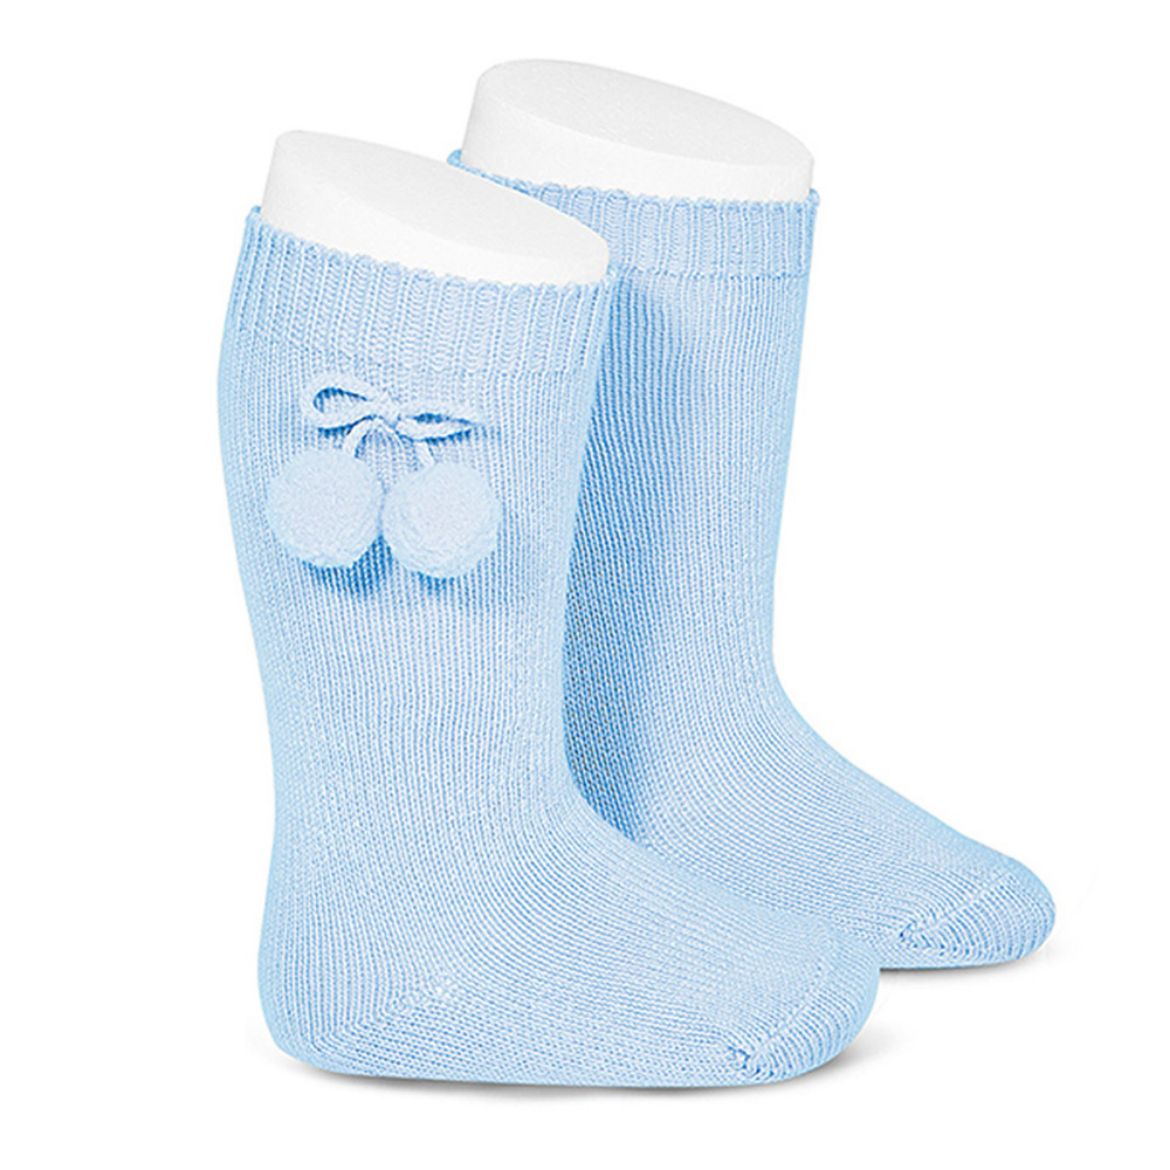 Picture of Condor Knee High Socks with PomPoms - Blue